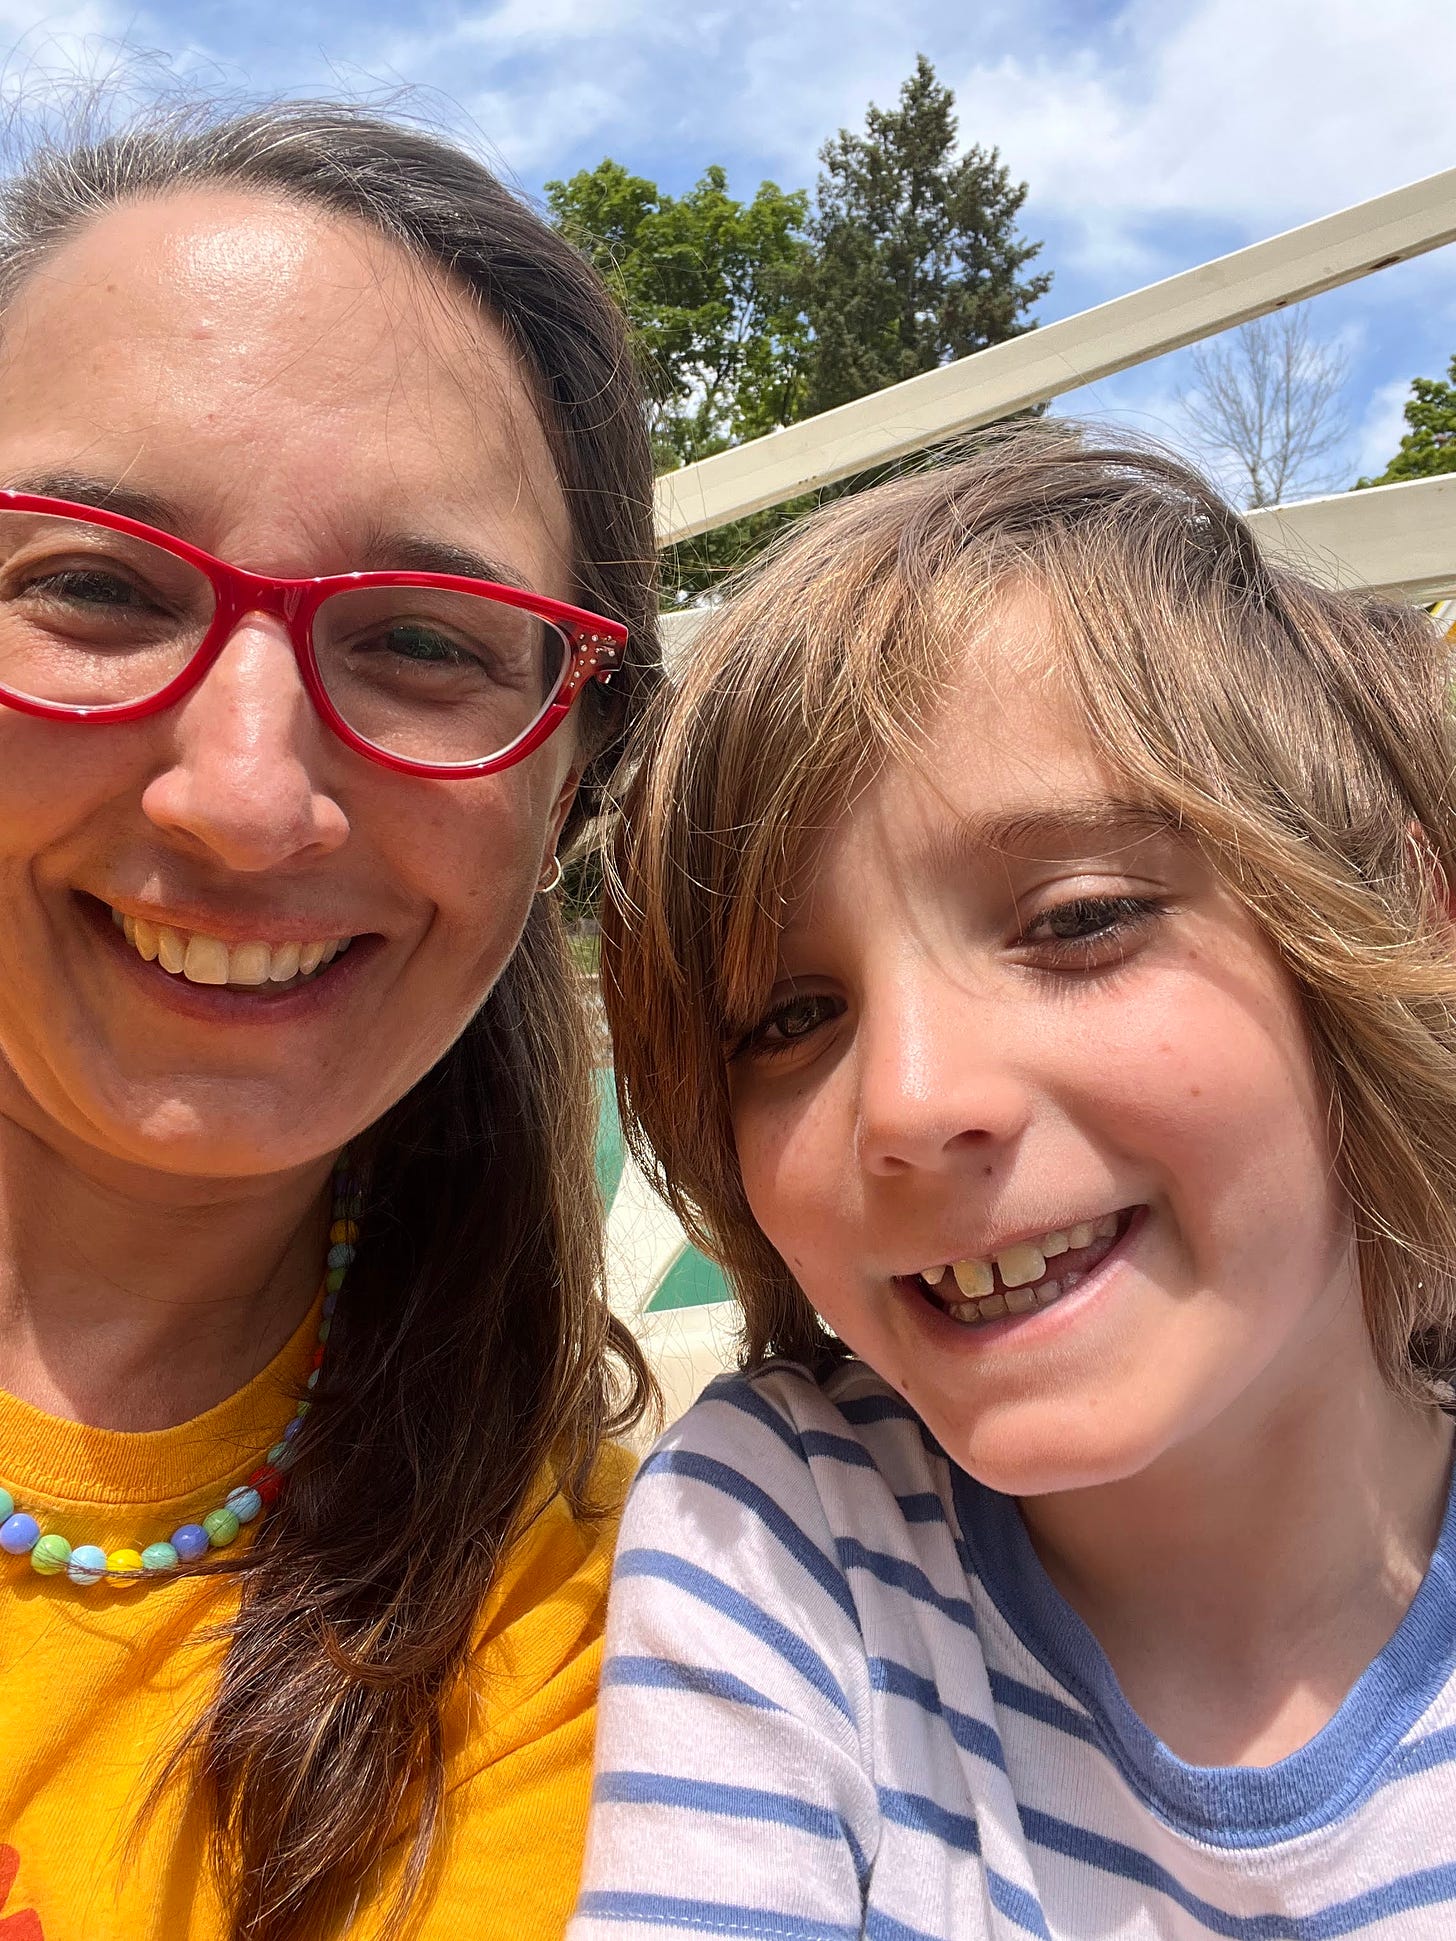 Sonya with long dark hair with gray in red glasses and a colorful shirt and necklace, next to Nathaniel who has longish hair and an impish grin, outside with trees in the background